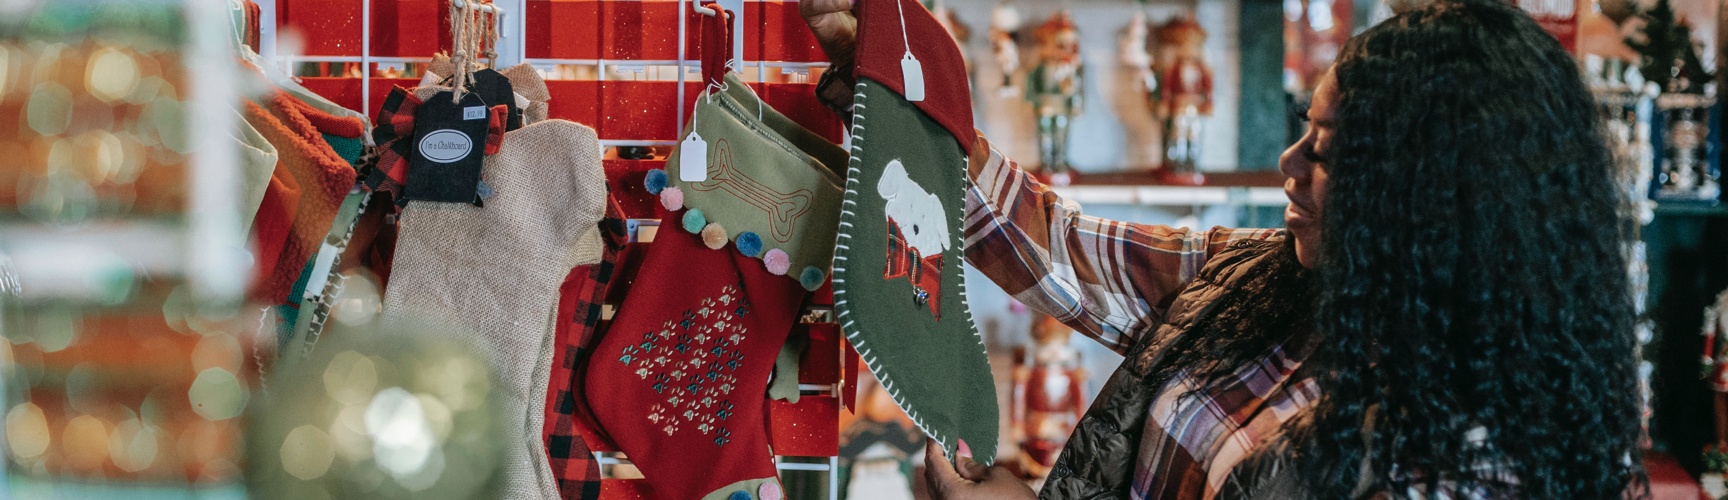 Shopper holding Christmas stockings for sale in store